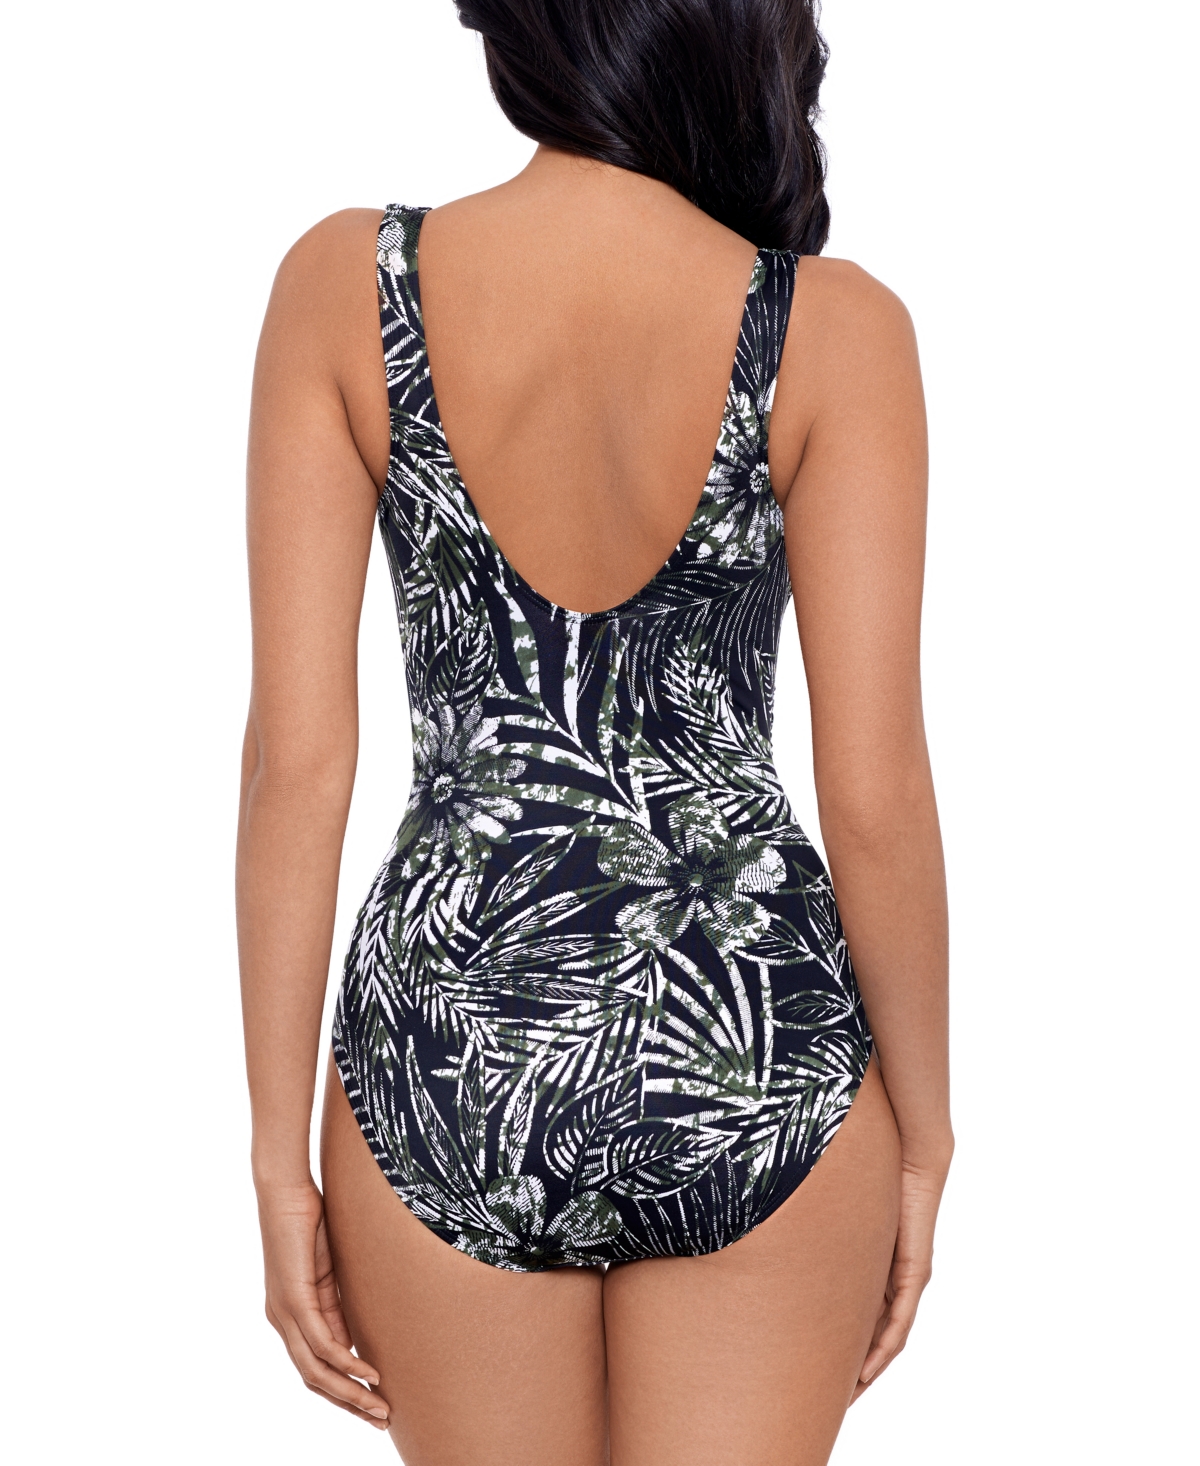 Shop Miraclesuit Women's Zahara Its A Wrap Underwire One-piece Swimsuit